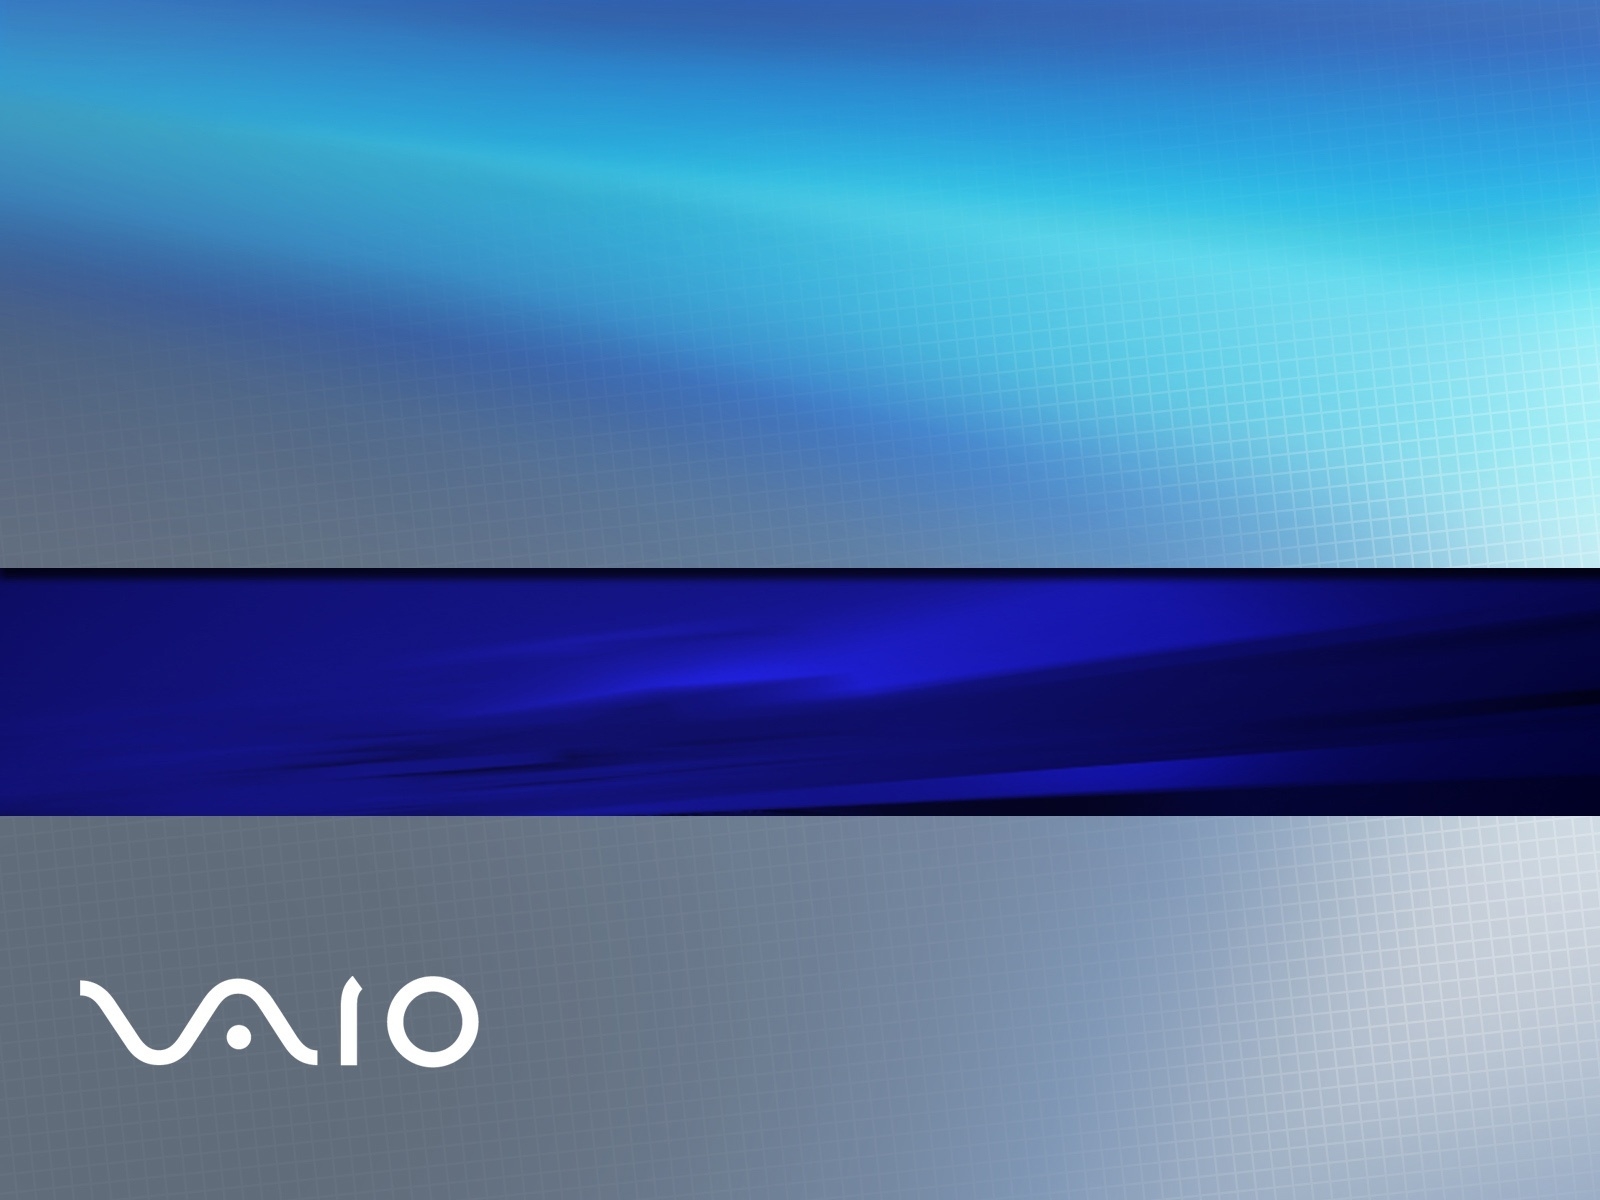 Sony Vaio blue for 1600 x 1200 resolution